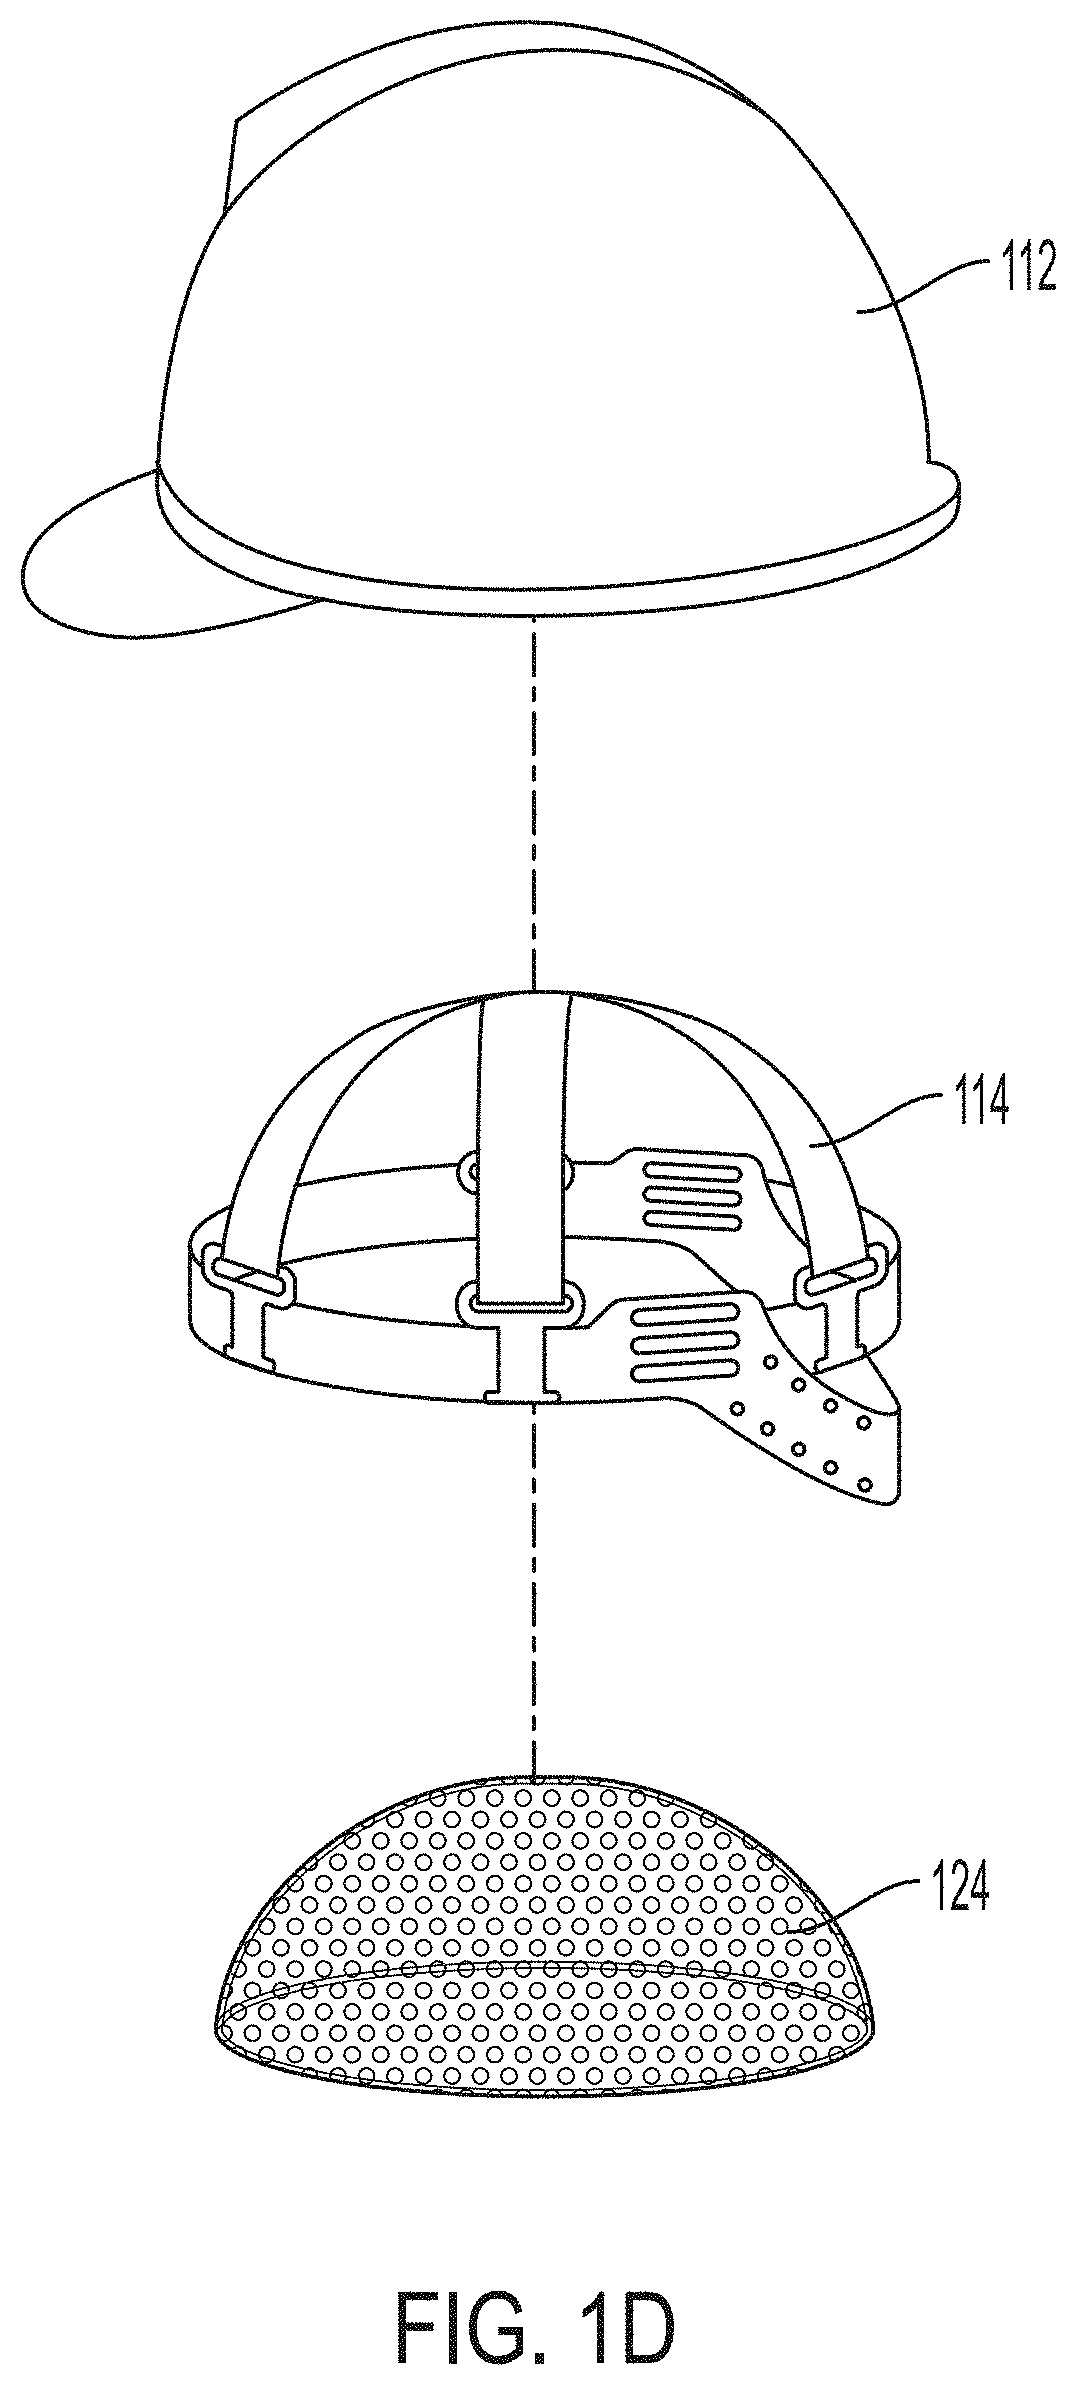 Image of the helmet with the air bubble cushioning.